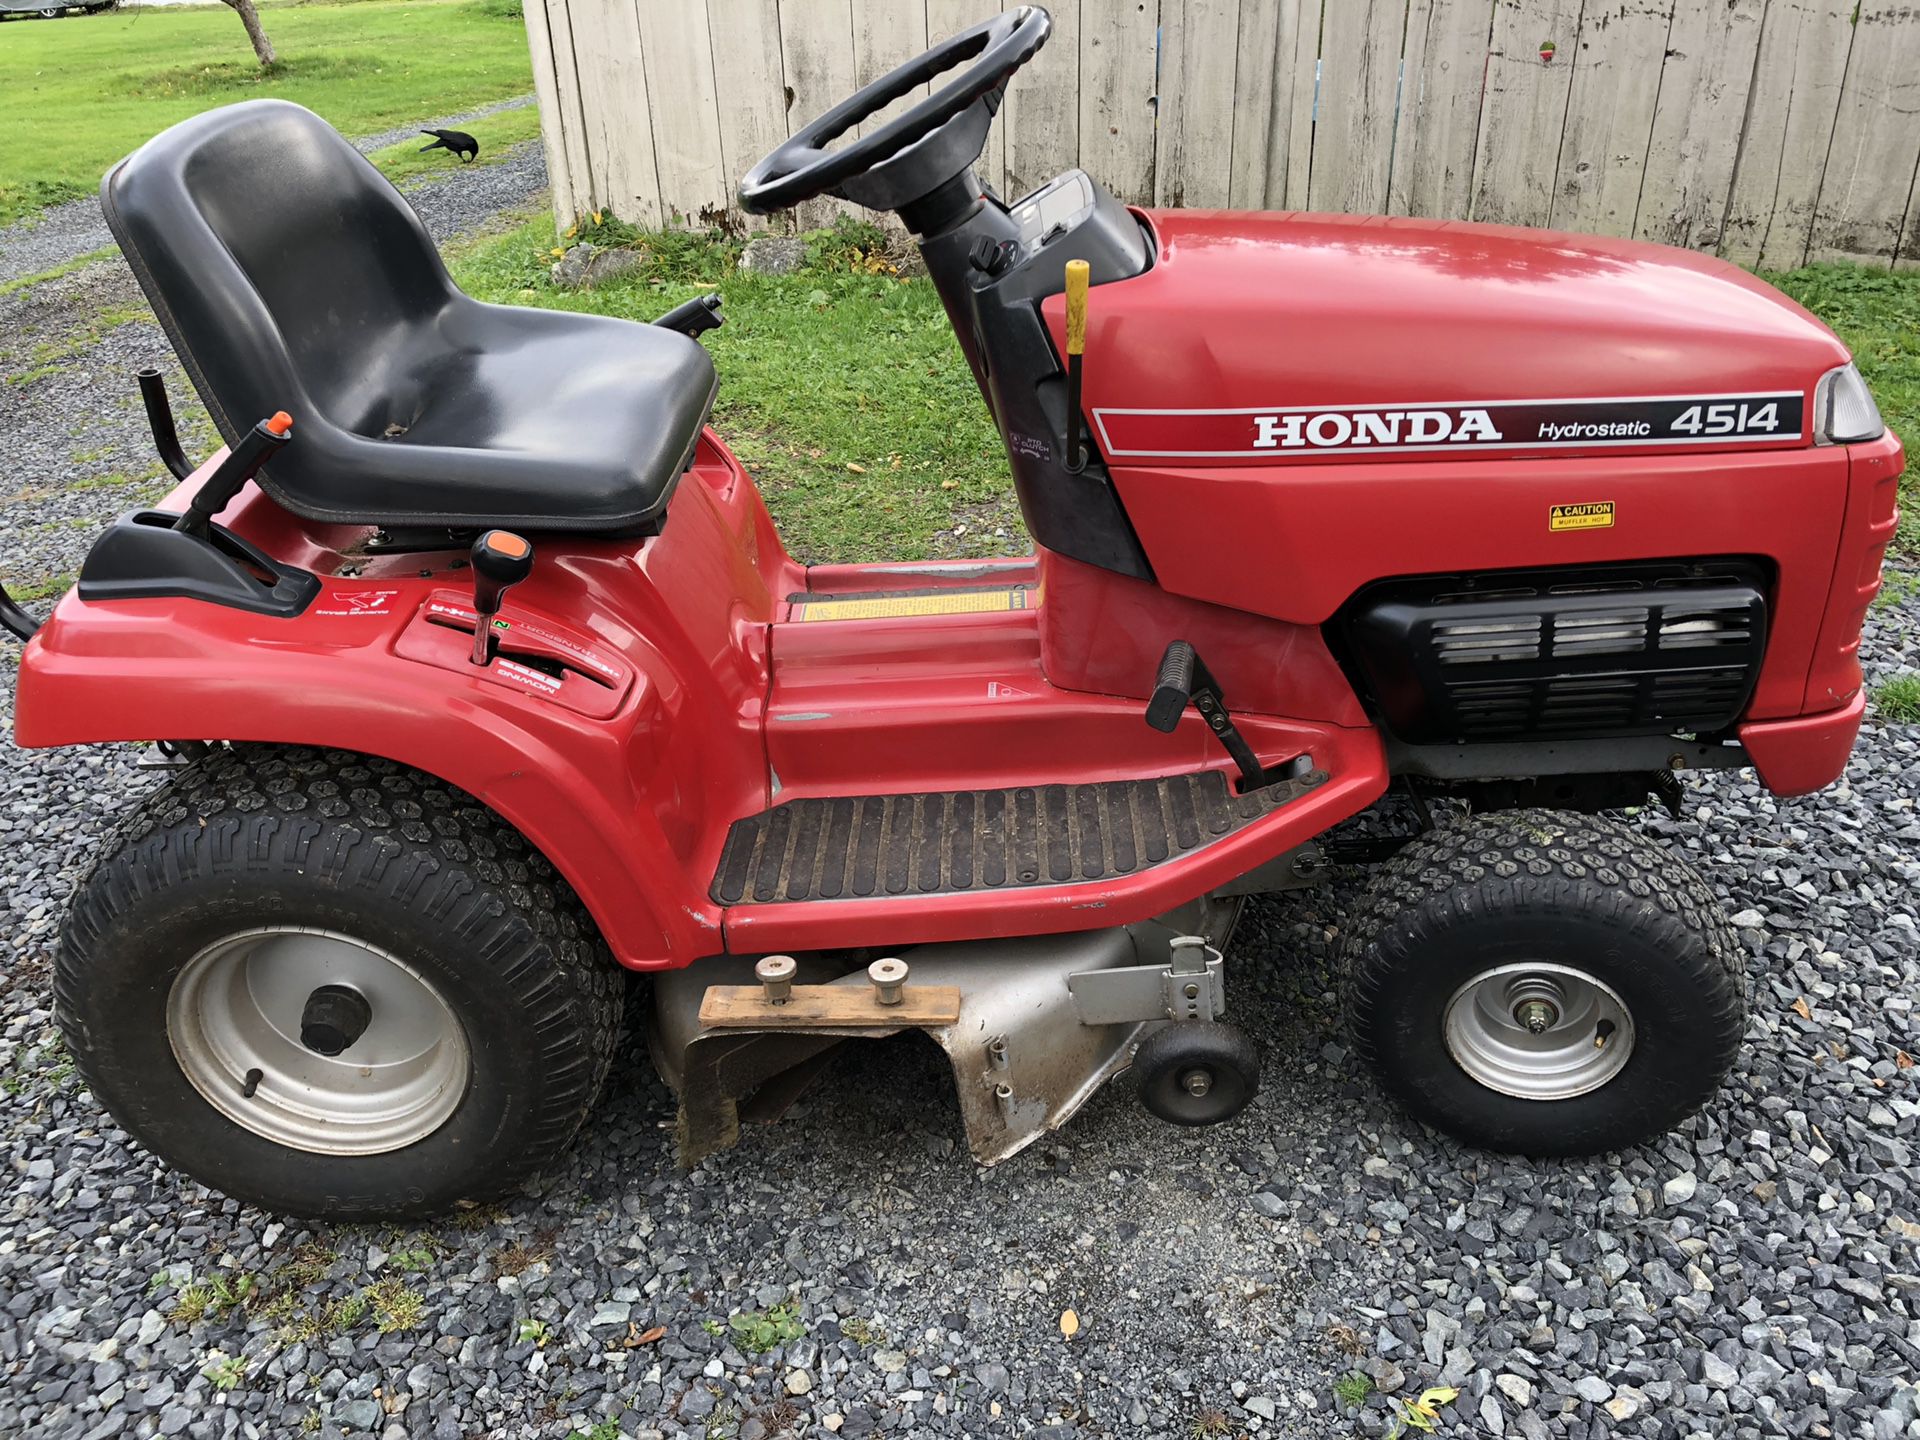 Honda 4514 hydrostatic riding lawn mower with grass bagger - Deliver available!